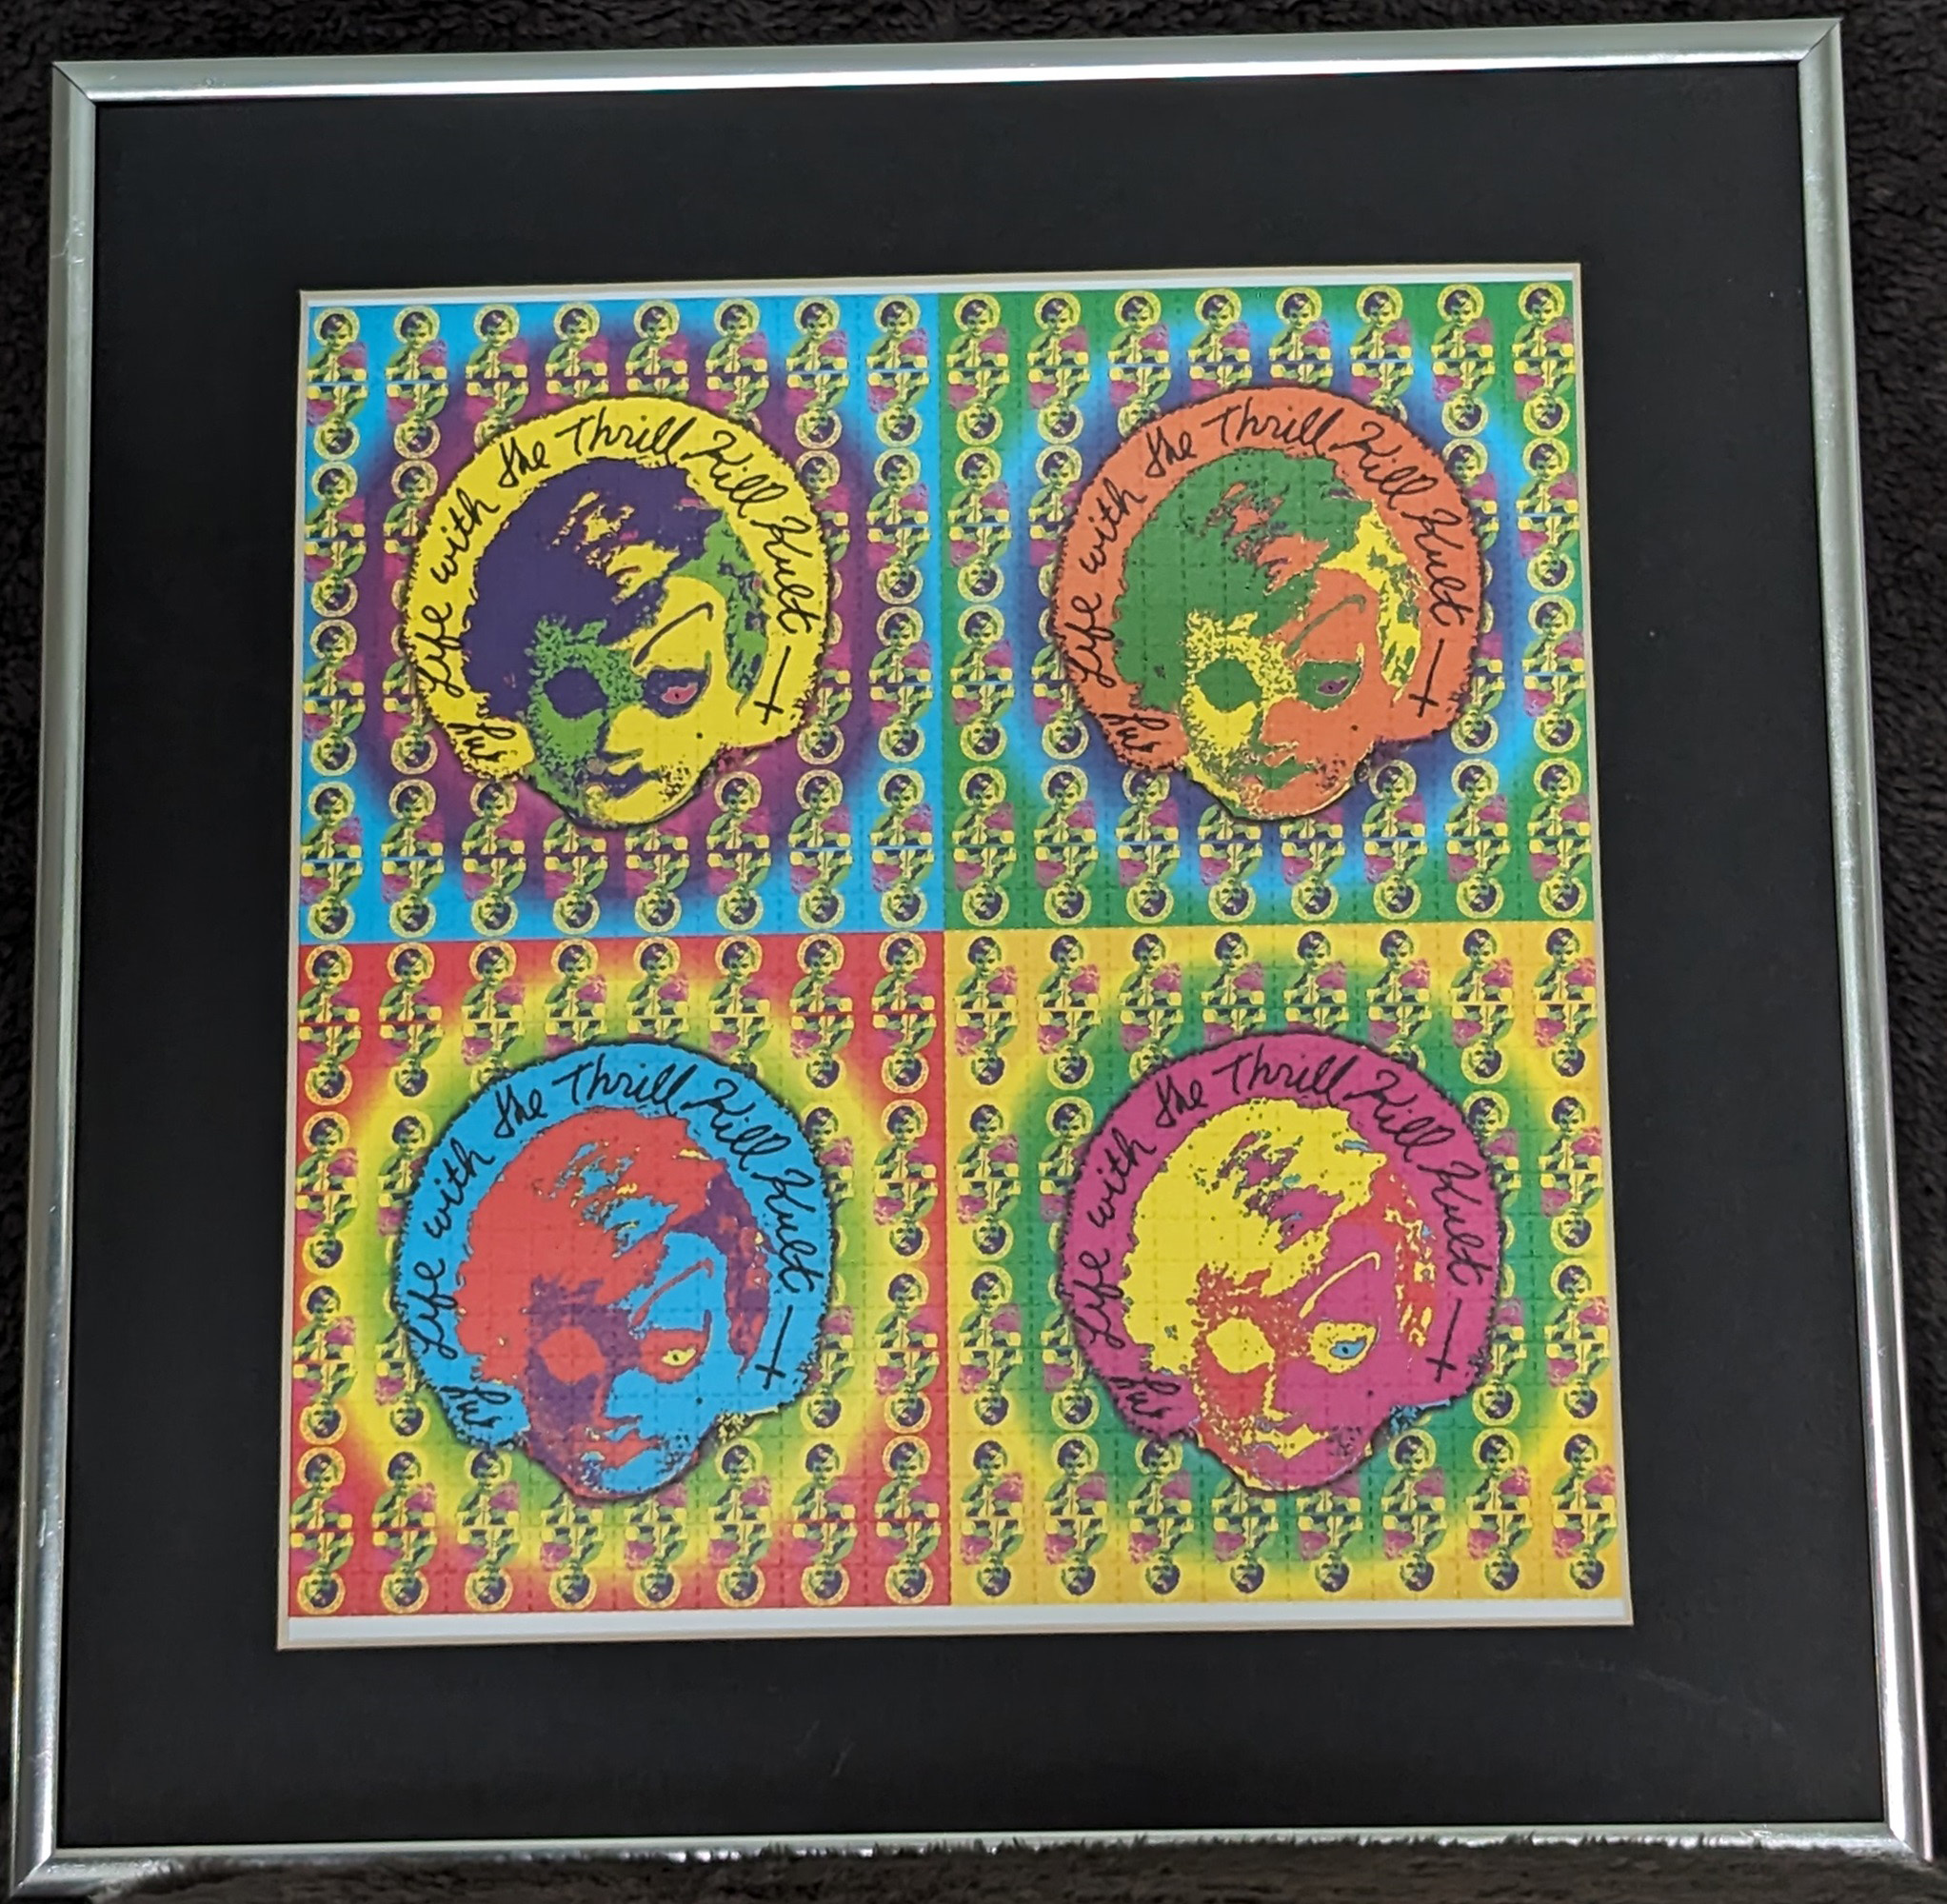 Just an example of how striking this unsigned blotter art appears when it’s encased in a frame.